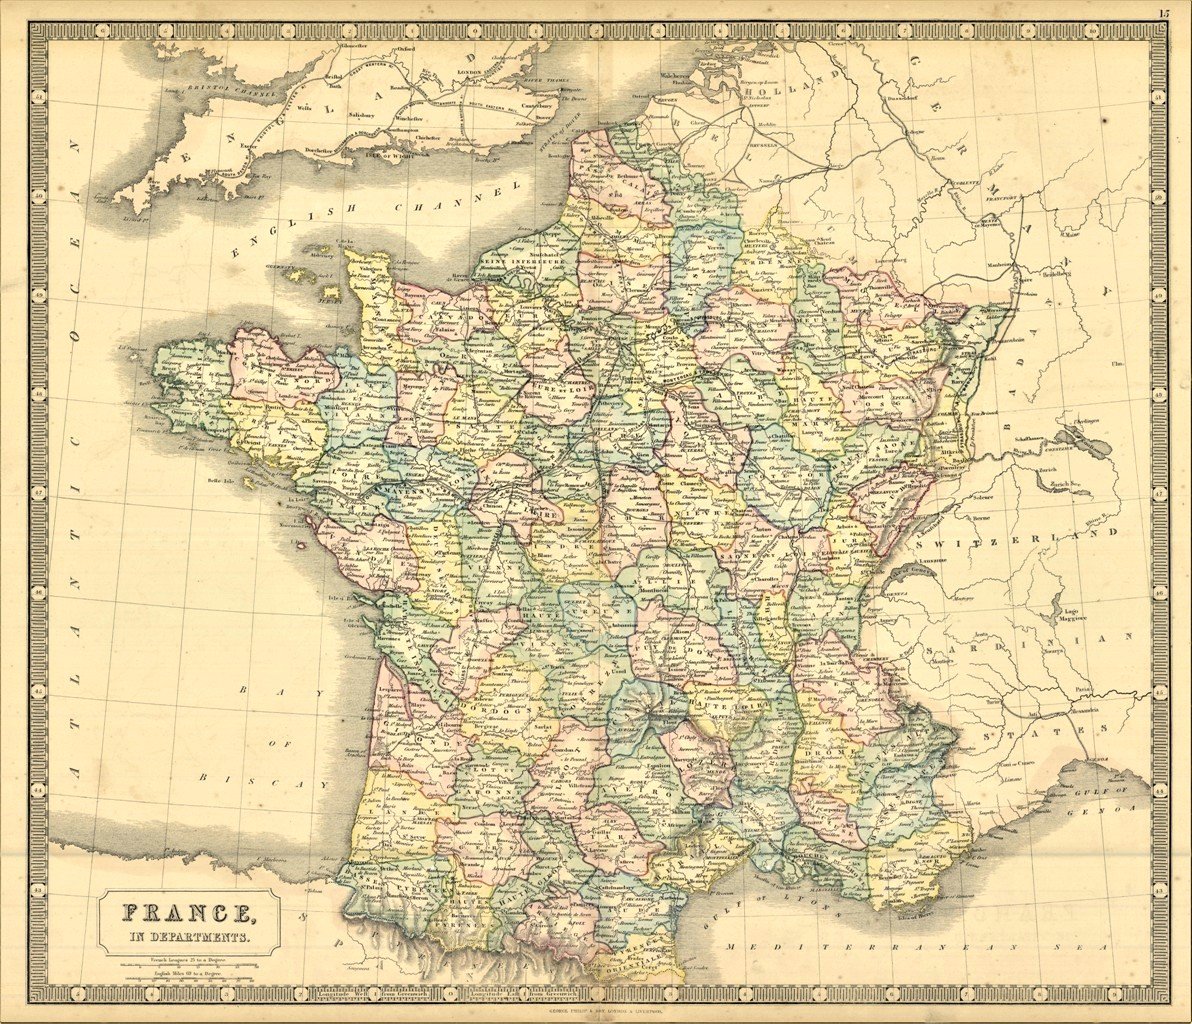 France, in Departments